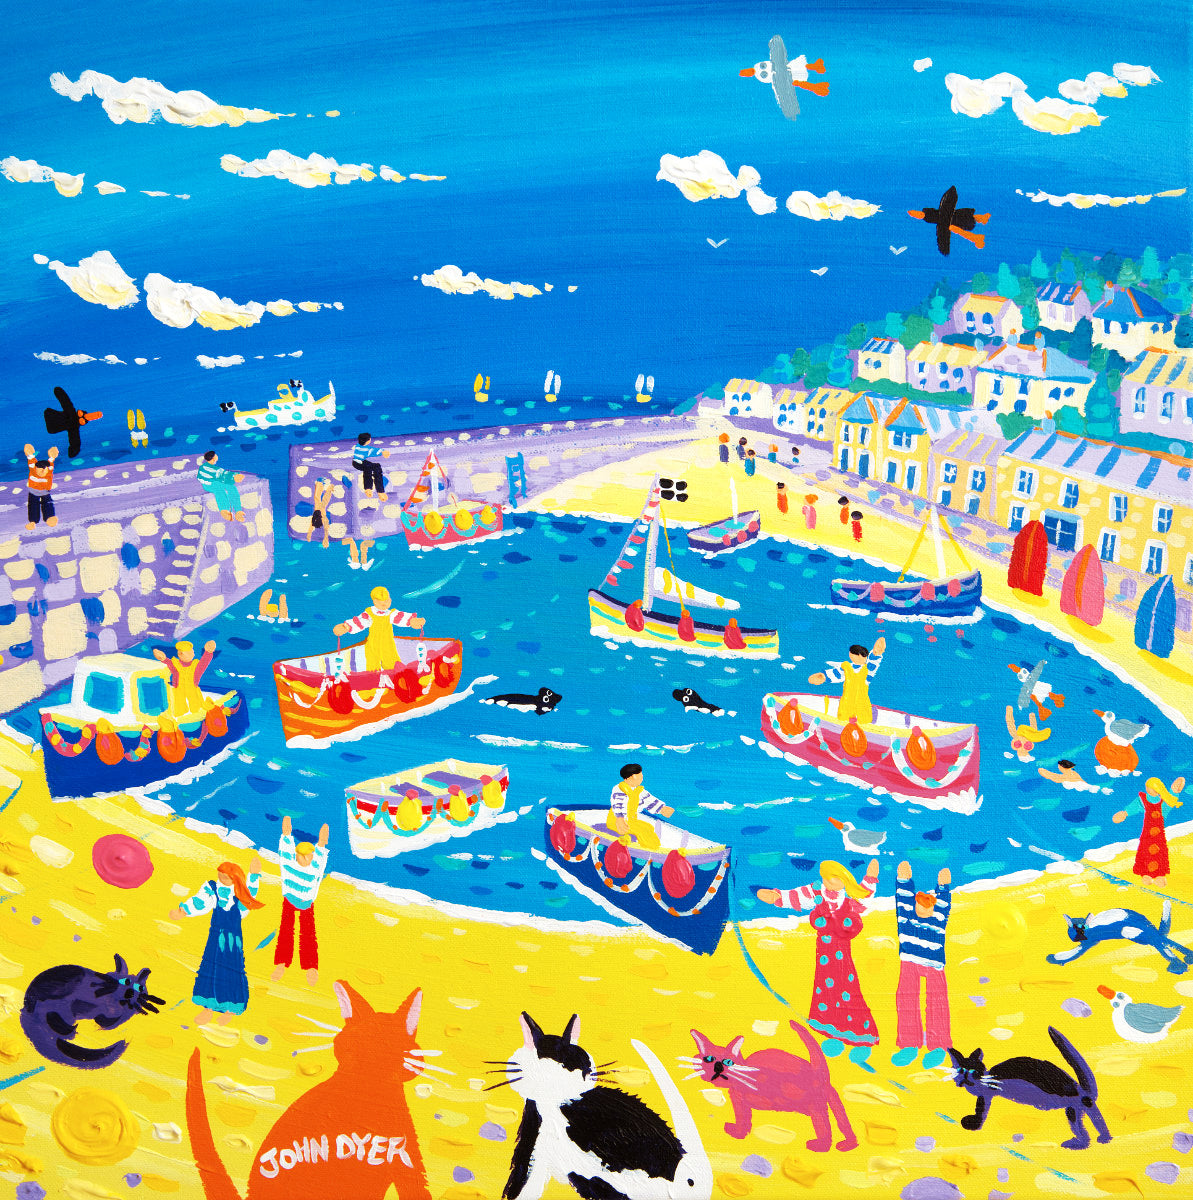 Cornwall art gallery painting by Cornish artist John Dyer of Mousehole cats and the harbour at Mousehole in Cornwall.